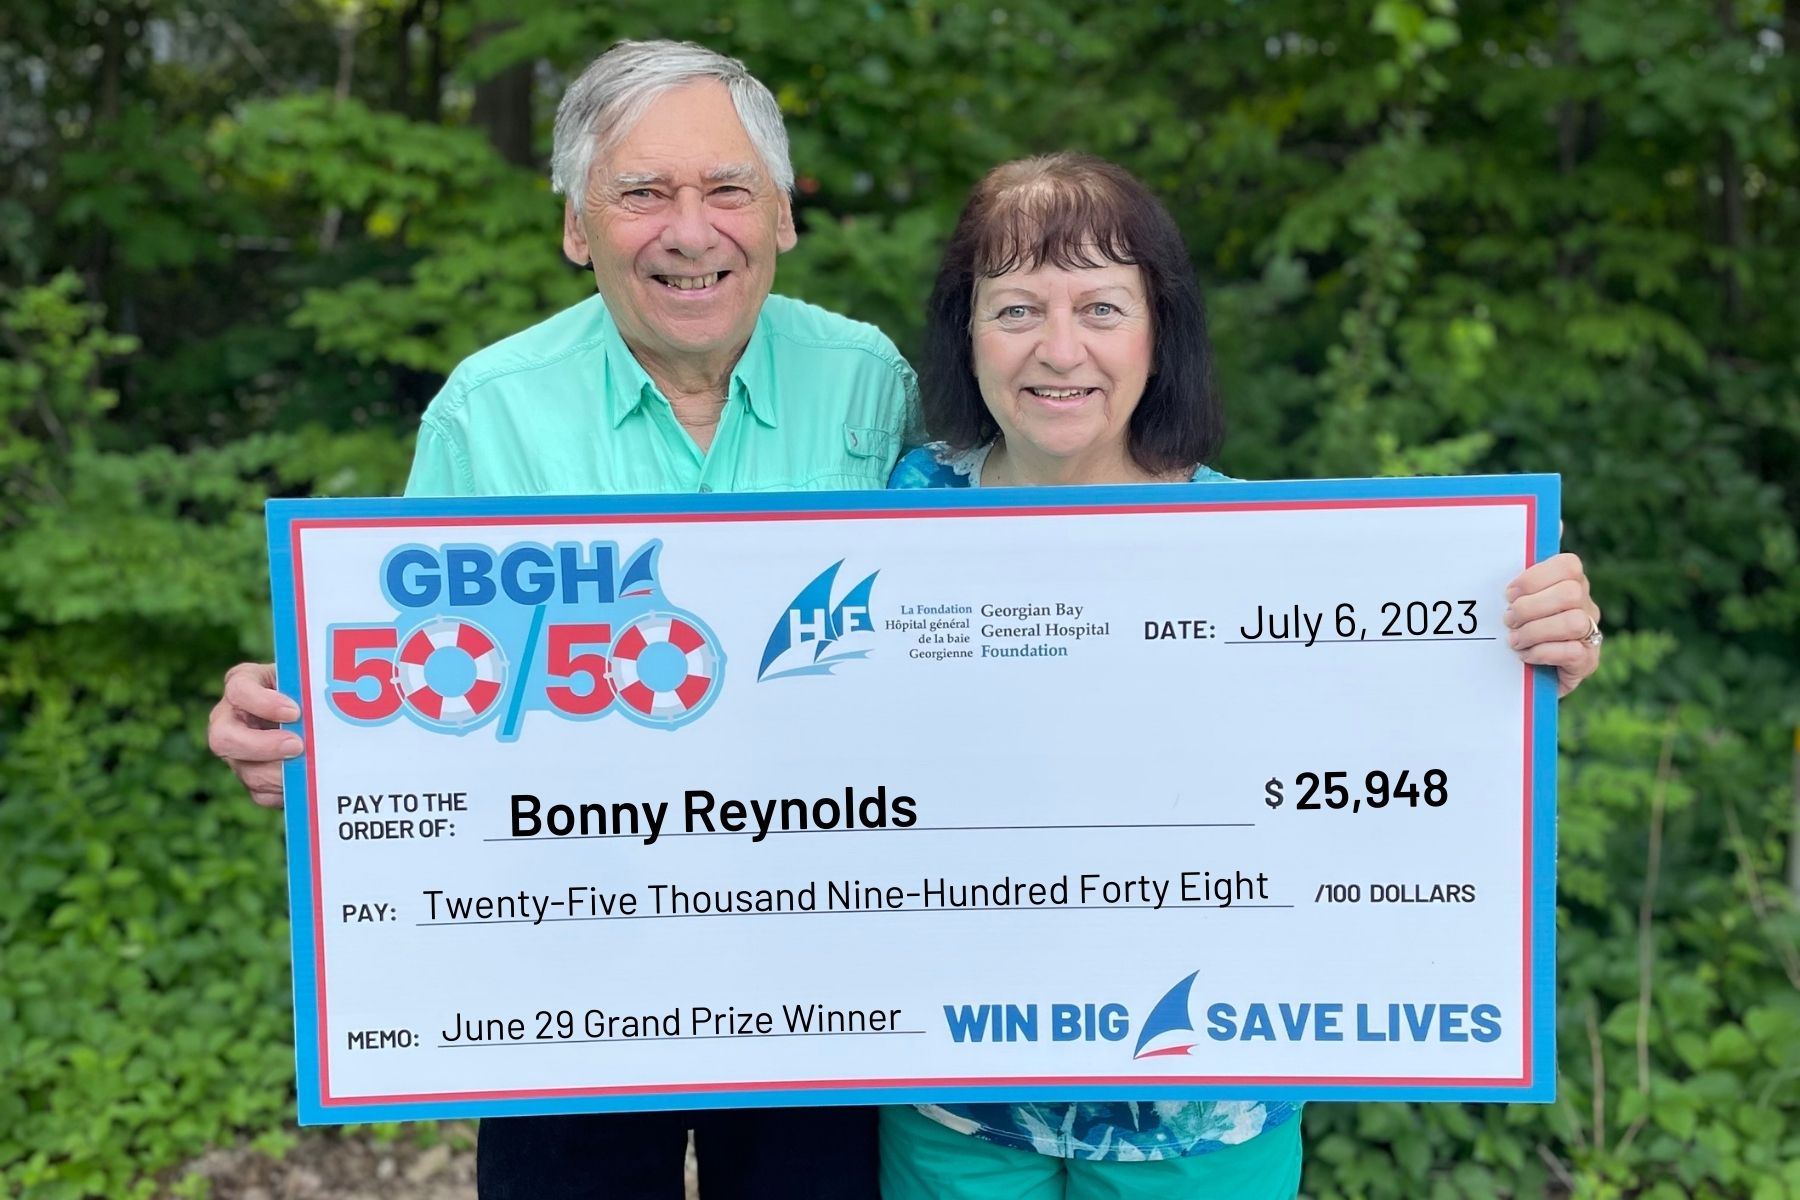 Bonney Reynolds and a man hold up a cheque for $25,948 presented for winning the June 50/50 draw.